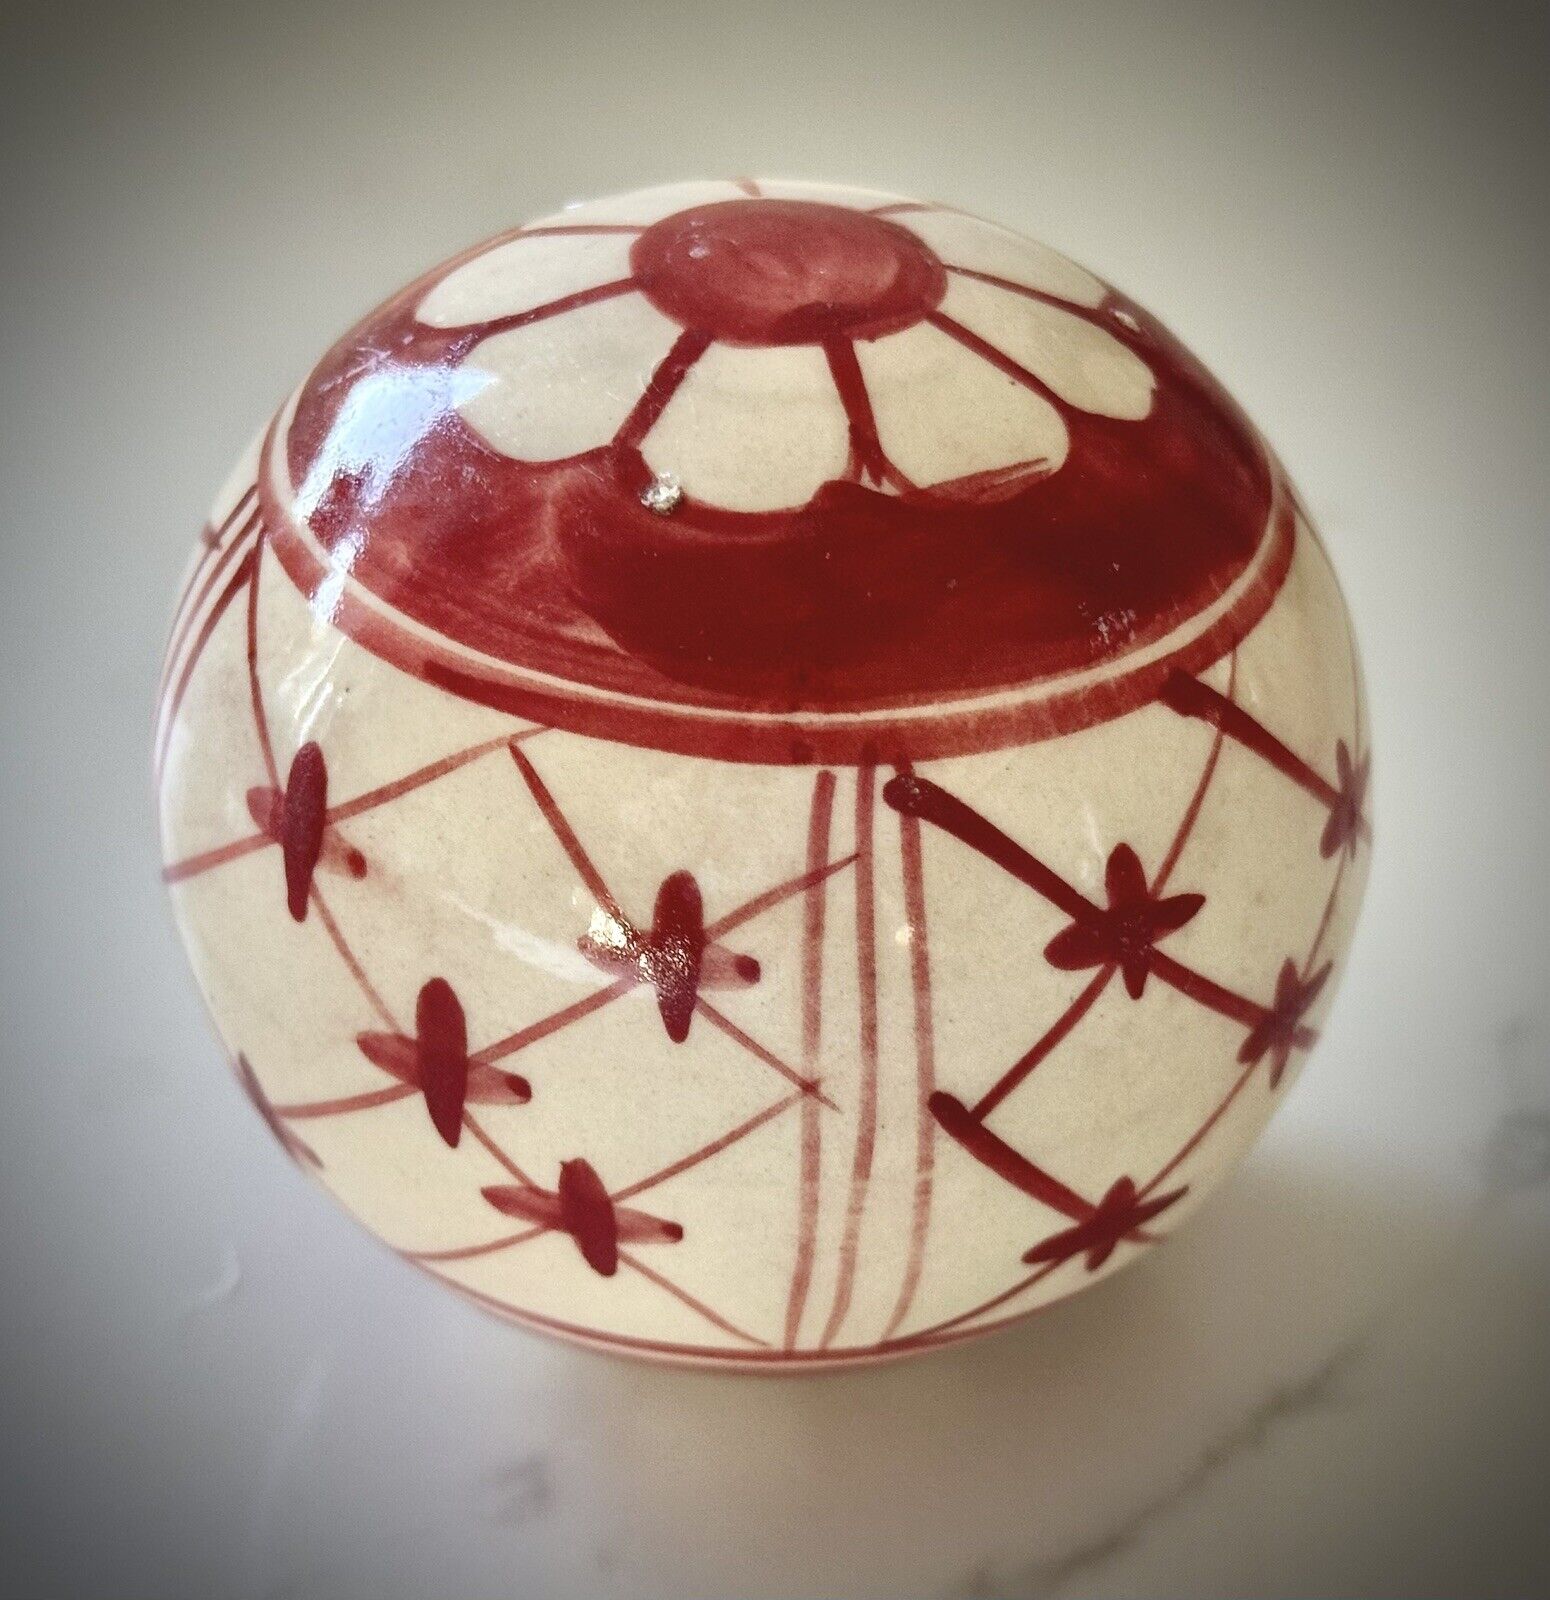 Vintage Carpet Ball  Ceramic Red And Cream With Stars And Stripes Design 3 Inch